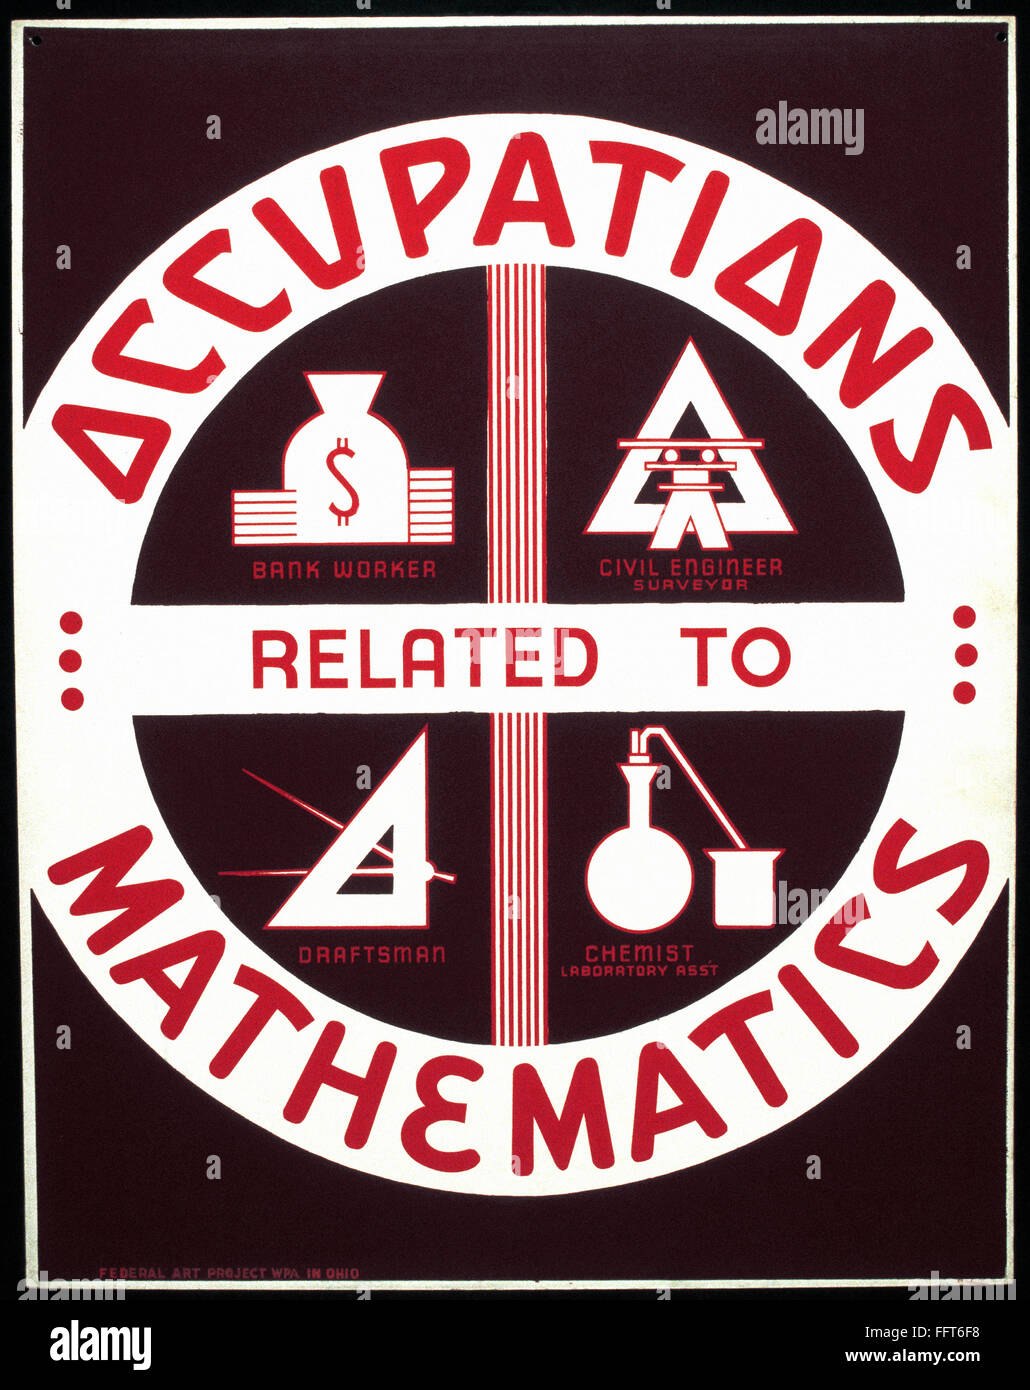 NEW DEAL: WPA POSTER. /n'Occupations Related to Mathematics.' American poster promoting occupations that require a background in mathematics. Silkscreen, c1938. Stock Photo